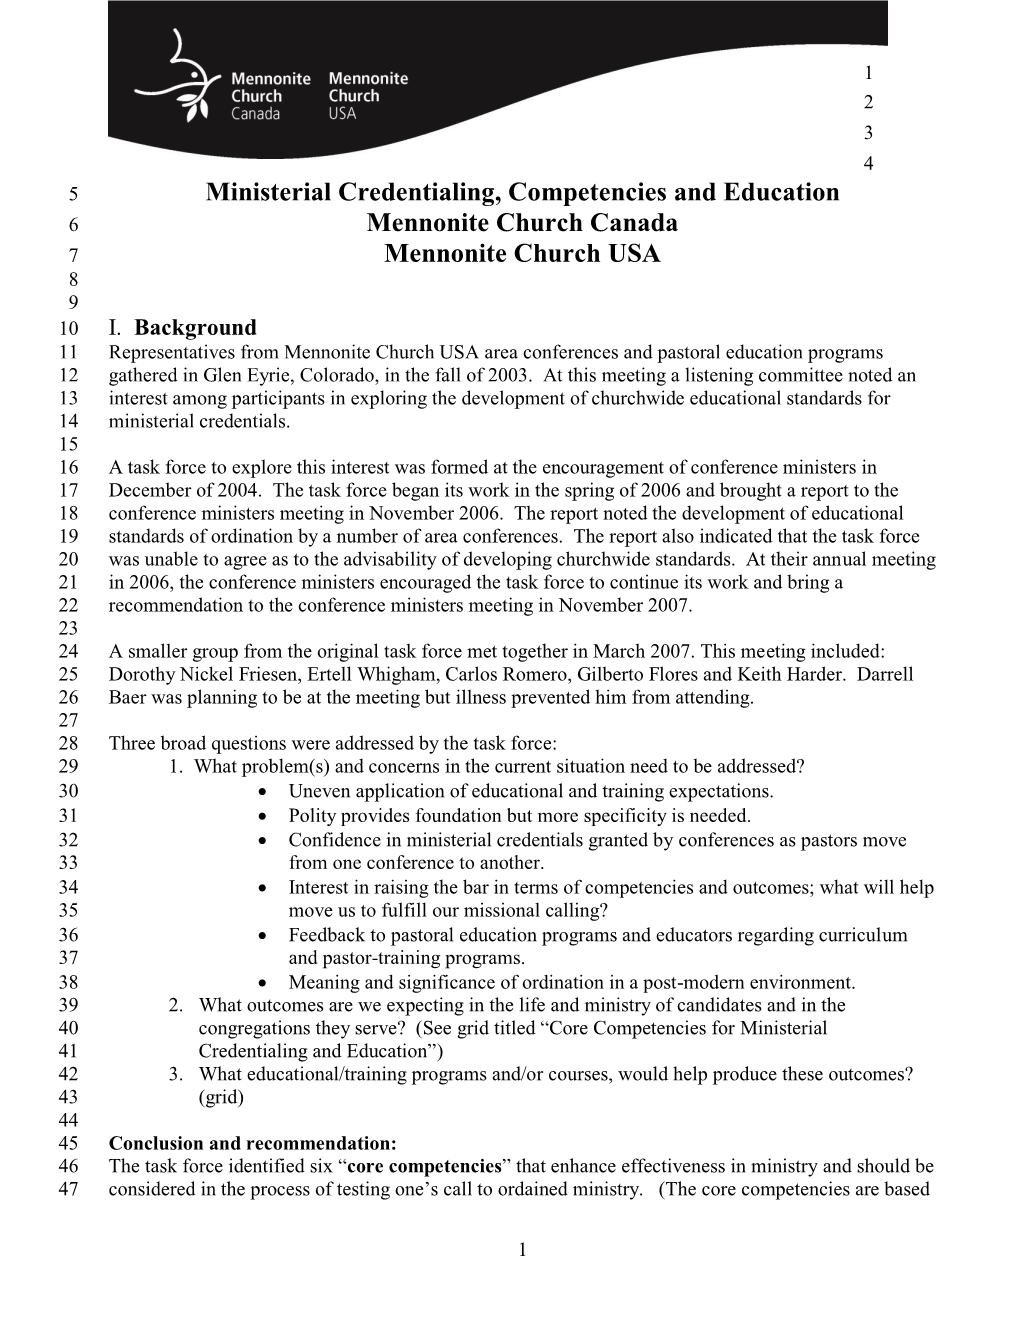 Core Competencies for Ministerial 41 Credentialing and Education”) 42 3